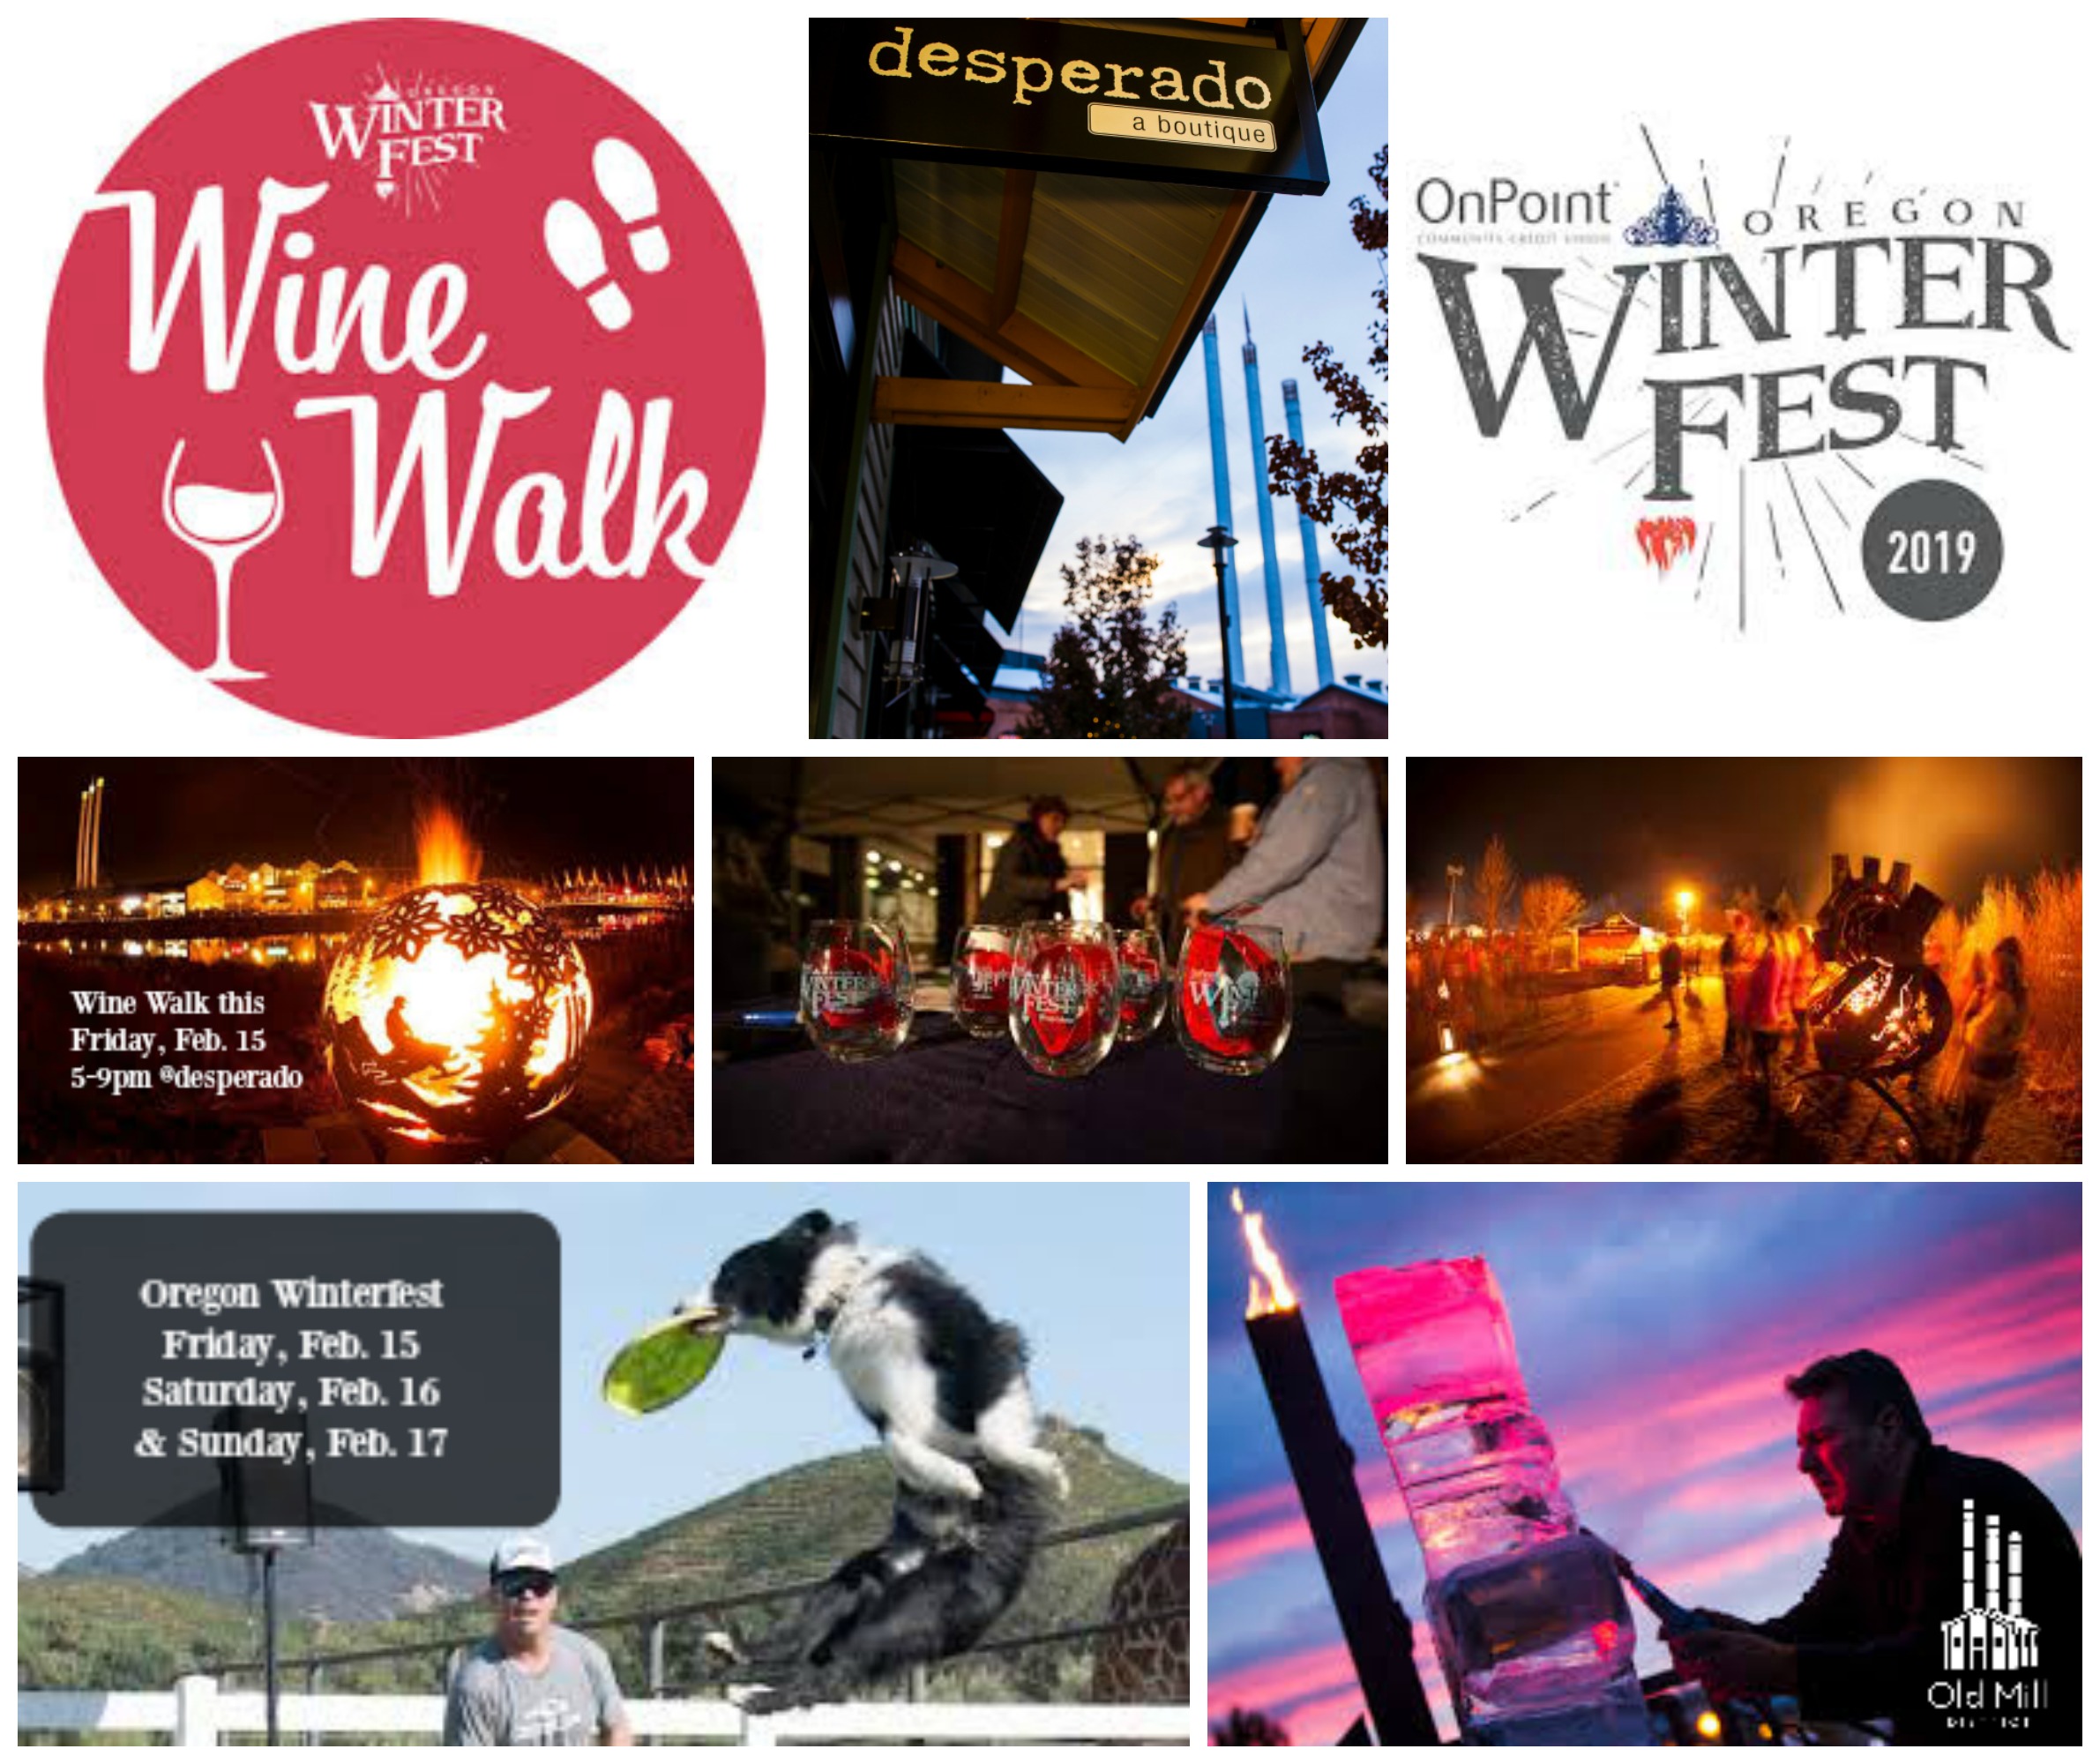 Collage of images showing activities at this year's Oregon Winterfest Wine Walk and weekend events in the Old Mill District.